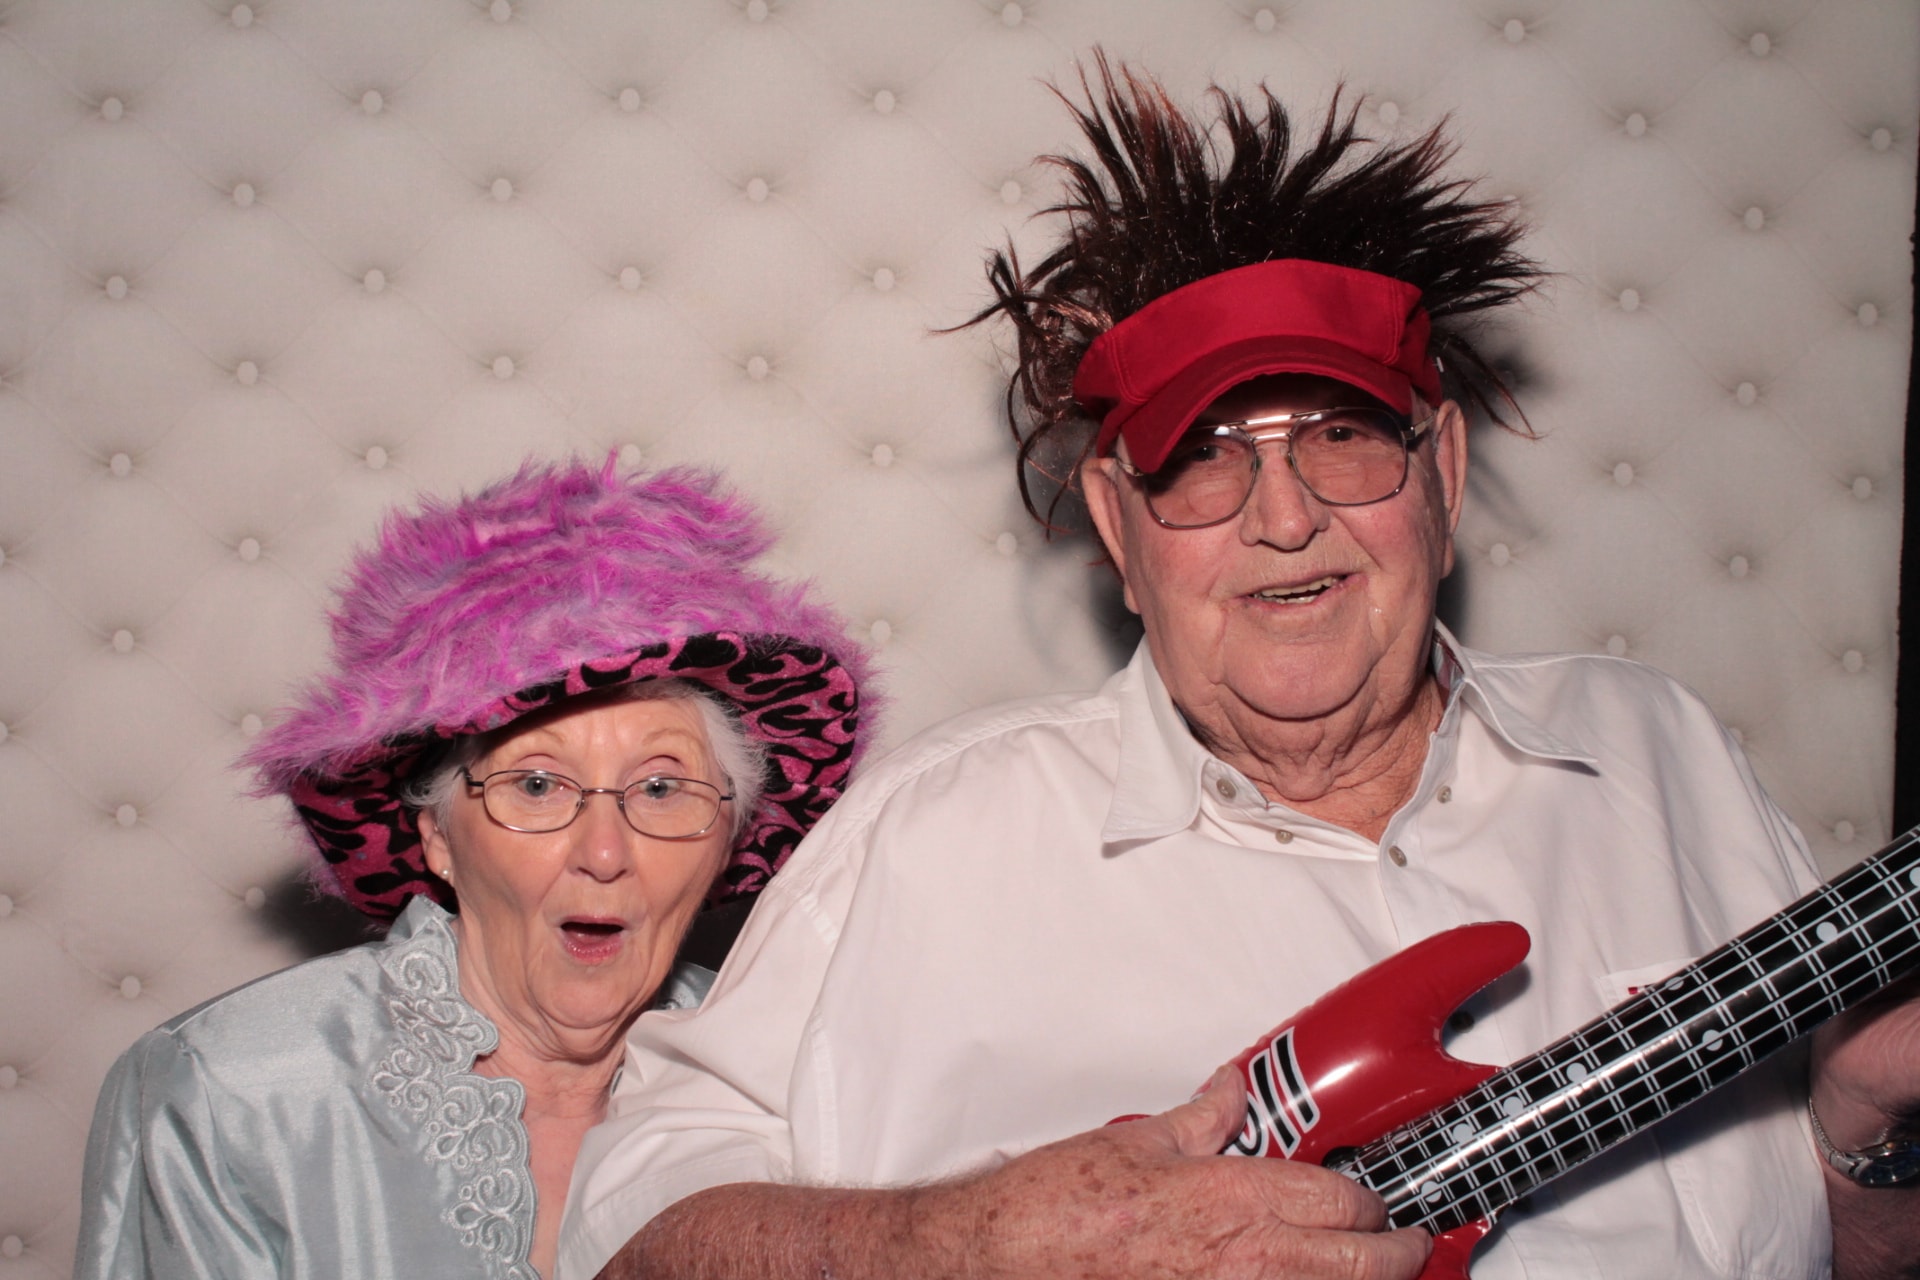 Photo-Booth-Rental-Wedding-Reception-Hermann Hall--Party--No.1-Affordable-Props-Fun-Memories